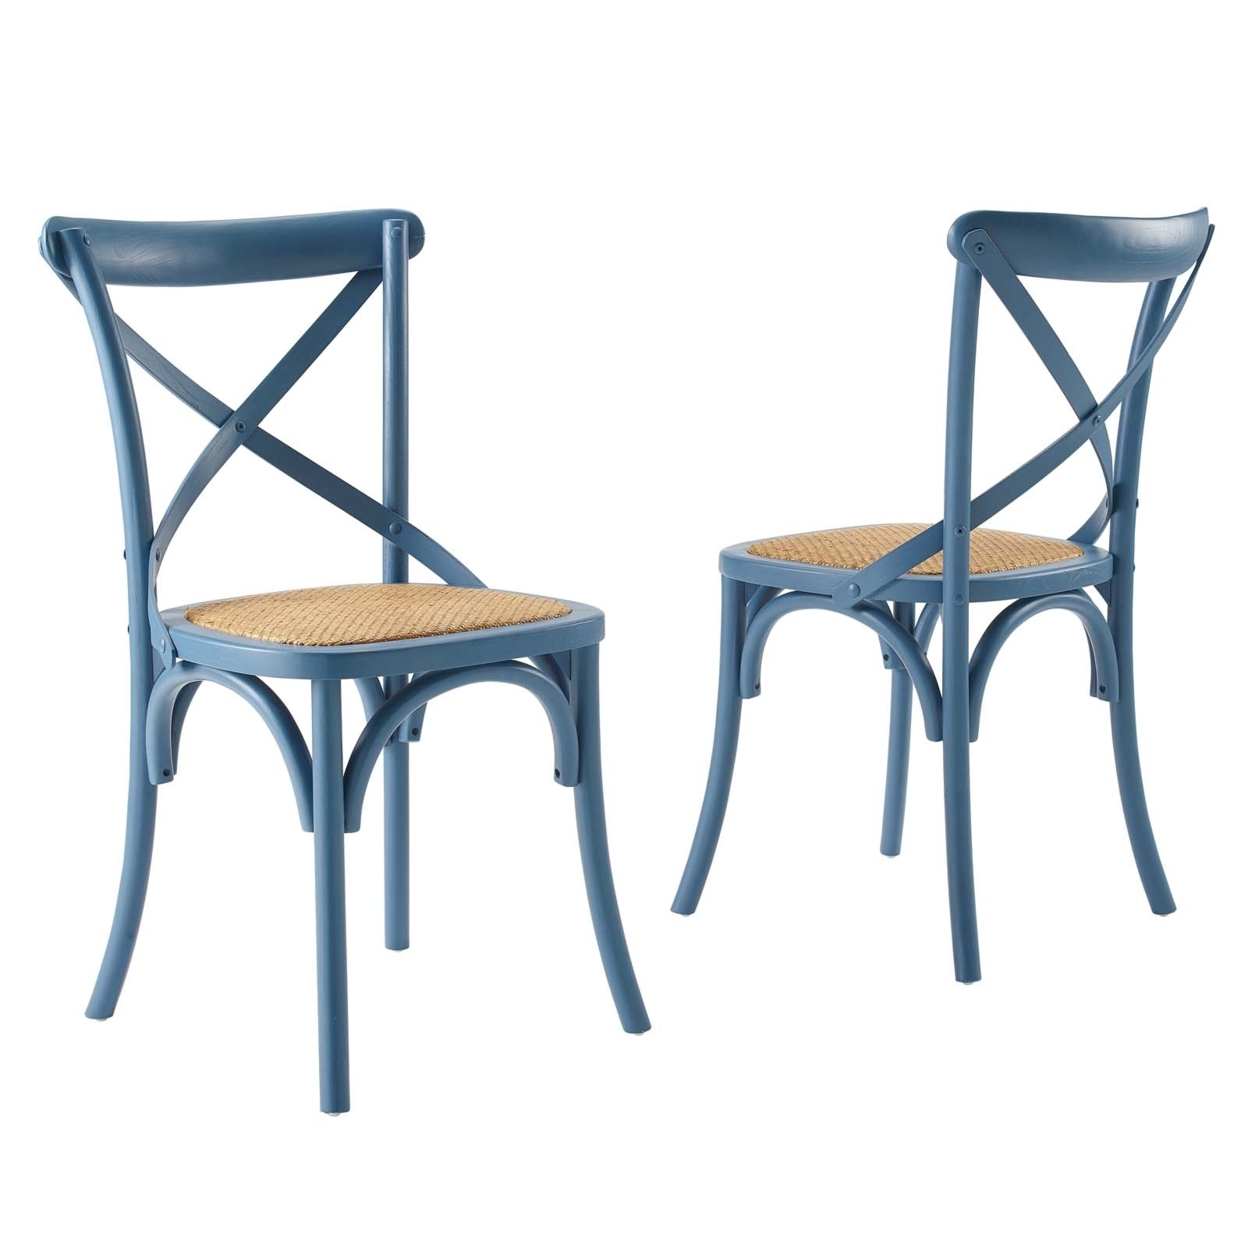 Gear Dining Side Chair Set Of 2, Harbor